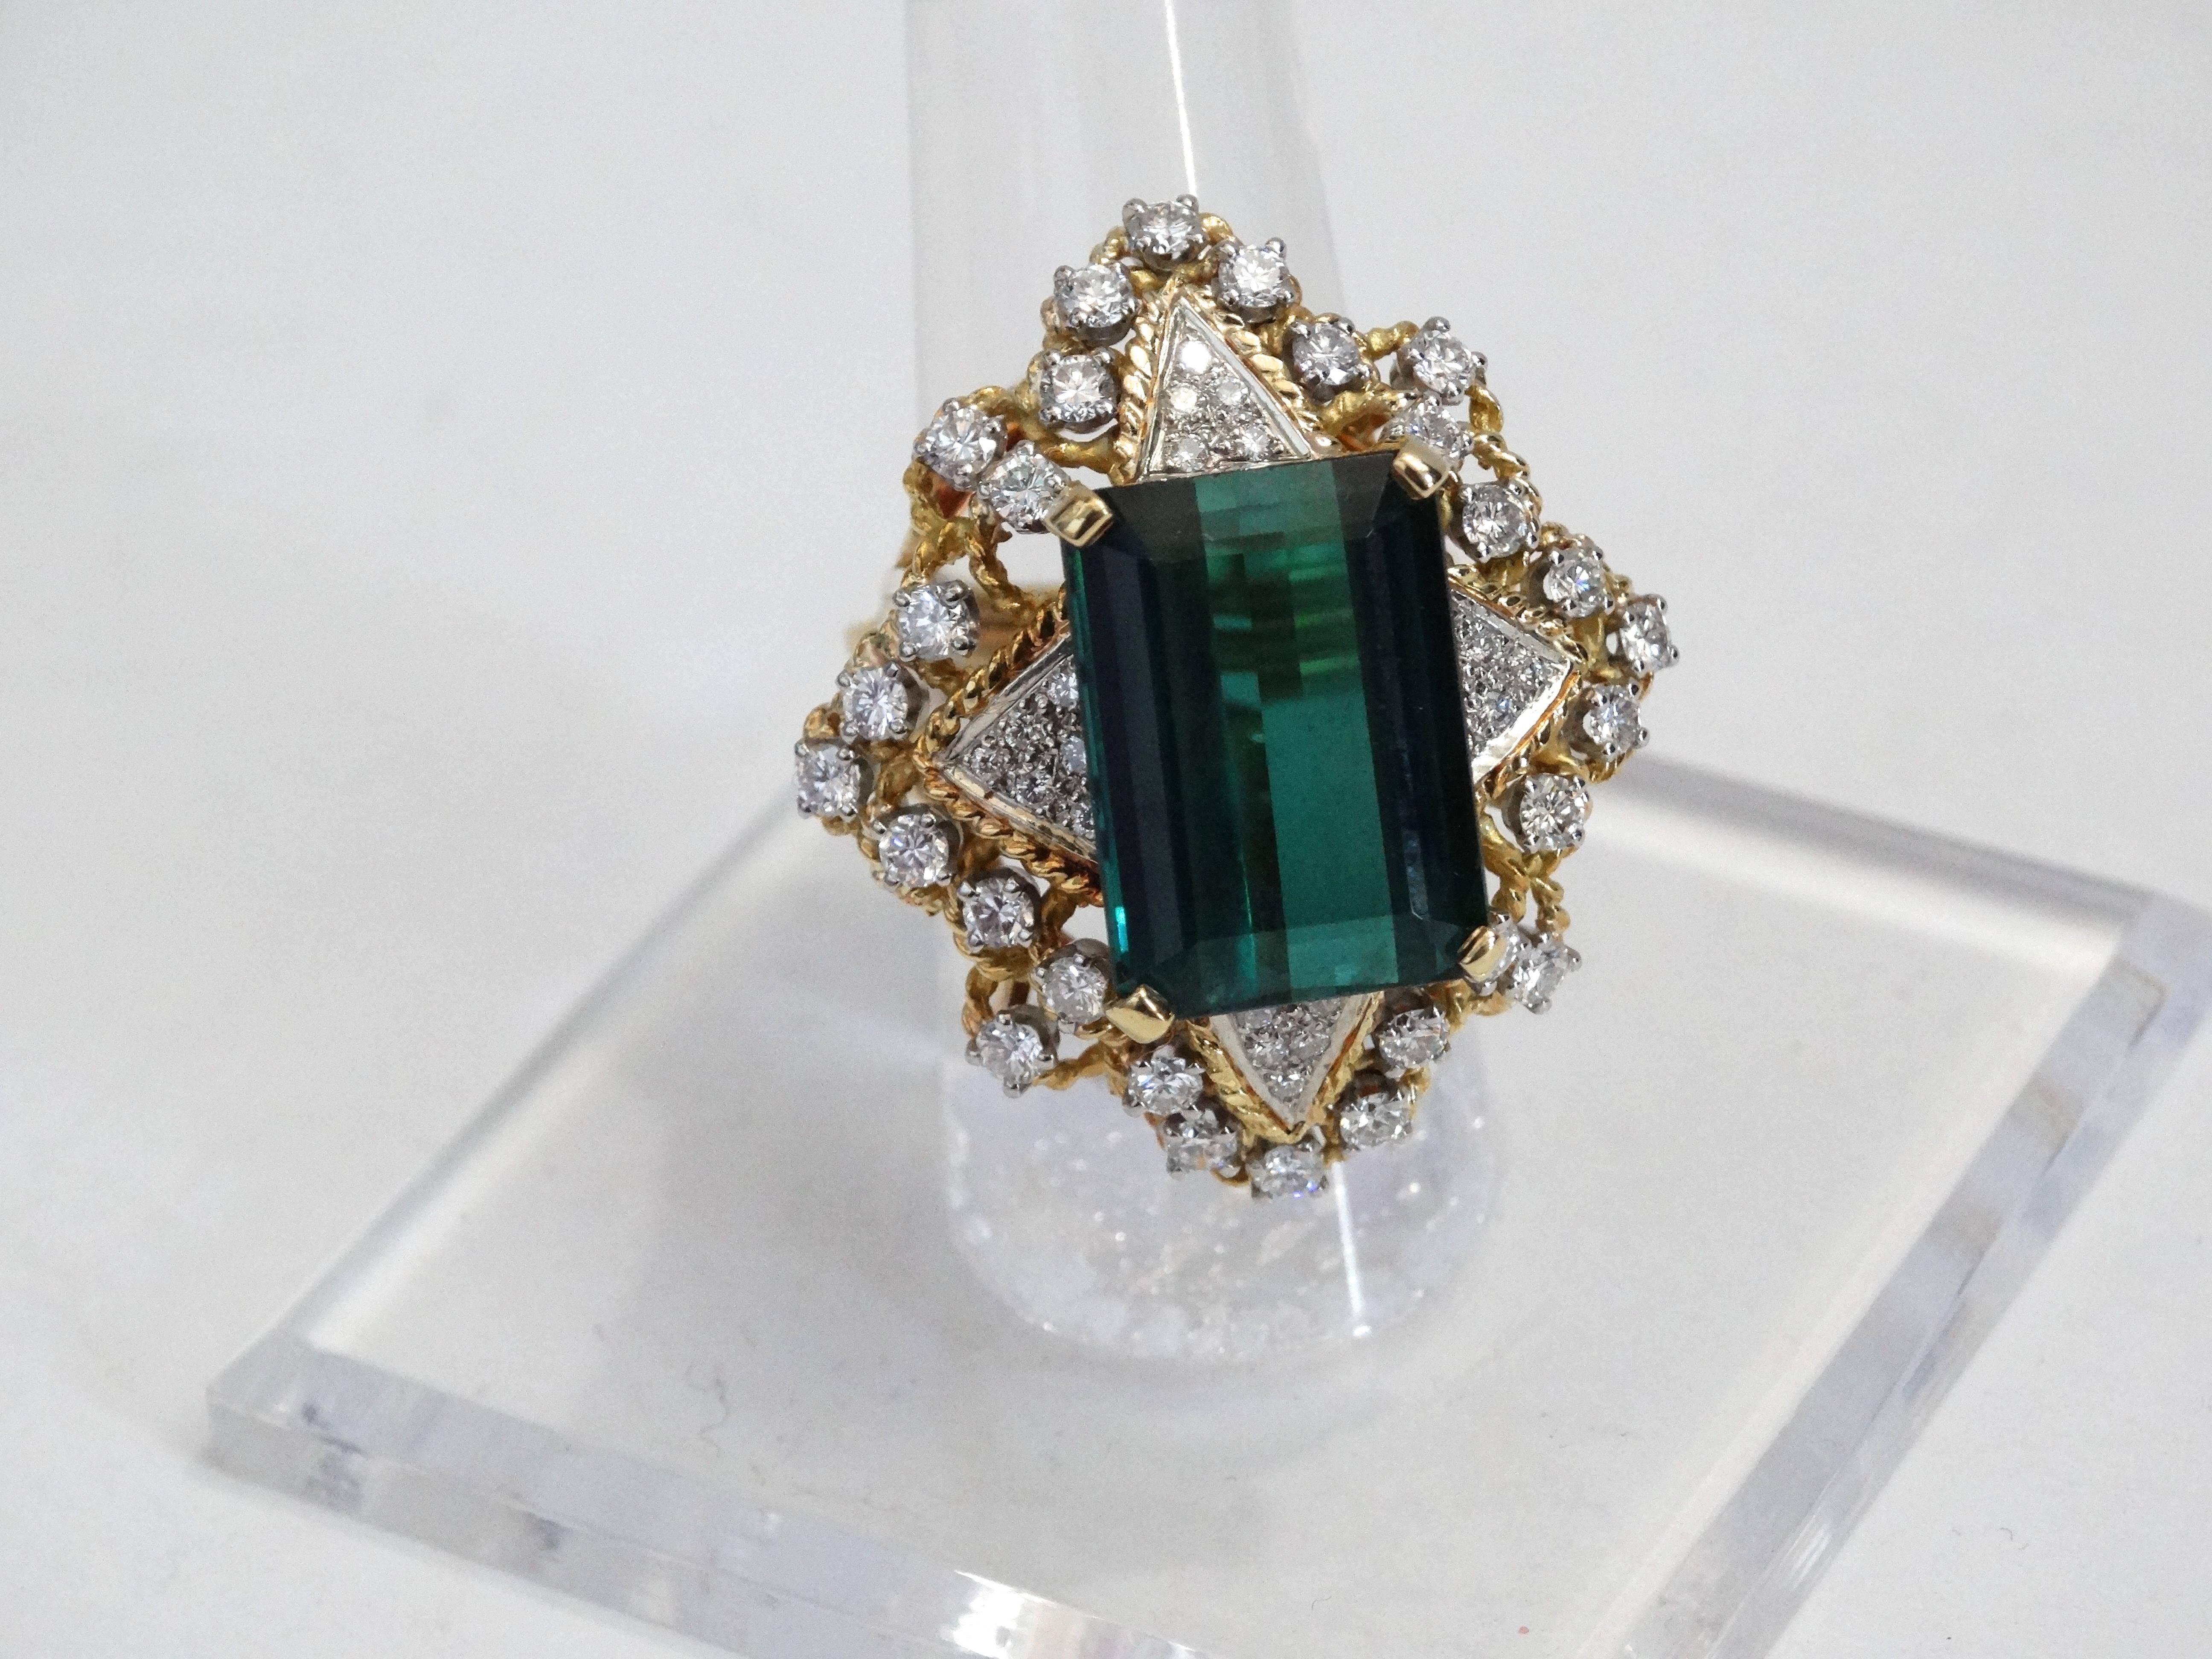 Stunning vintage 10 carat Green Tourmaline Cocktail ring surrounded by 27 Diamonds and 4 < clusters ( Diamond weight is 2 carats total) set in a unique 18 karat gold ring setting, setting has a lovely art deco feel. Tourmaline has a beautiful